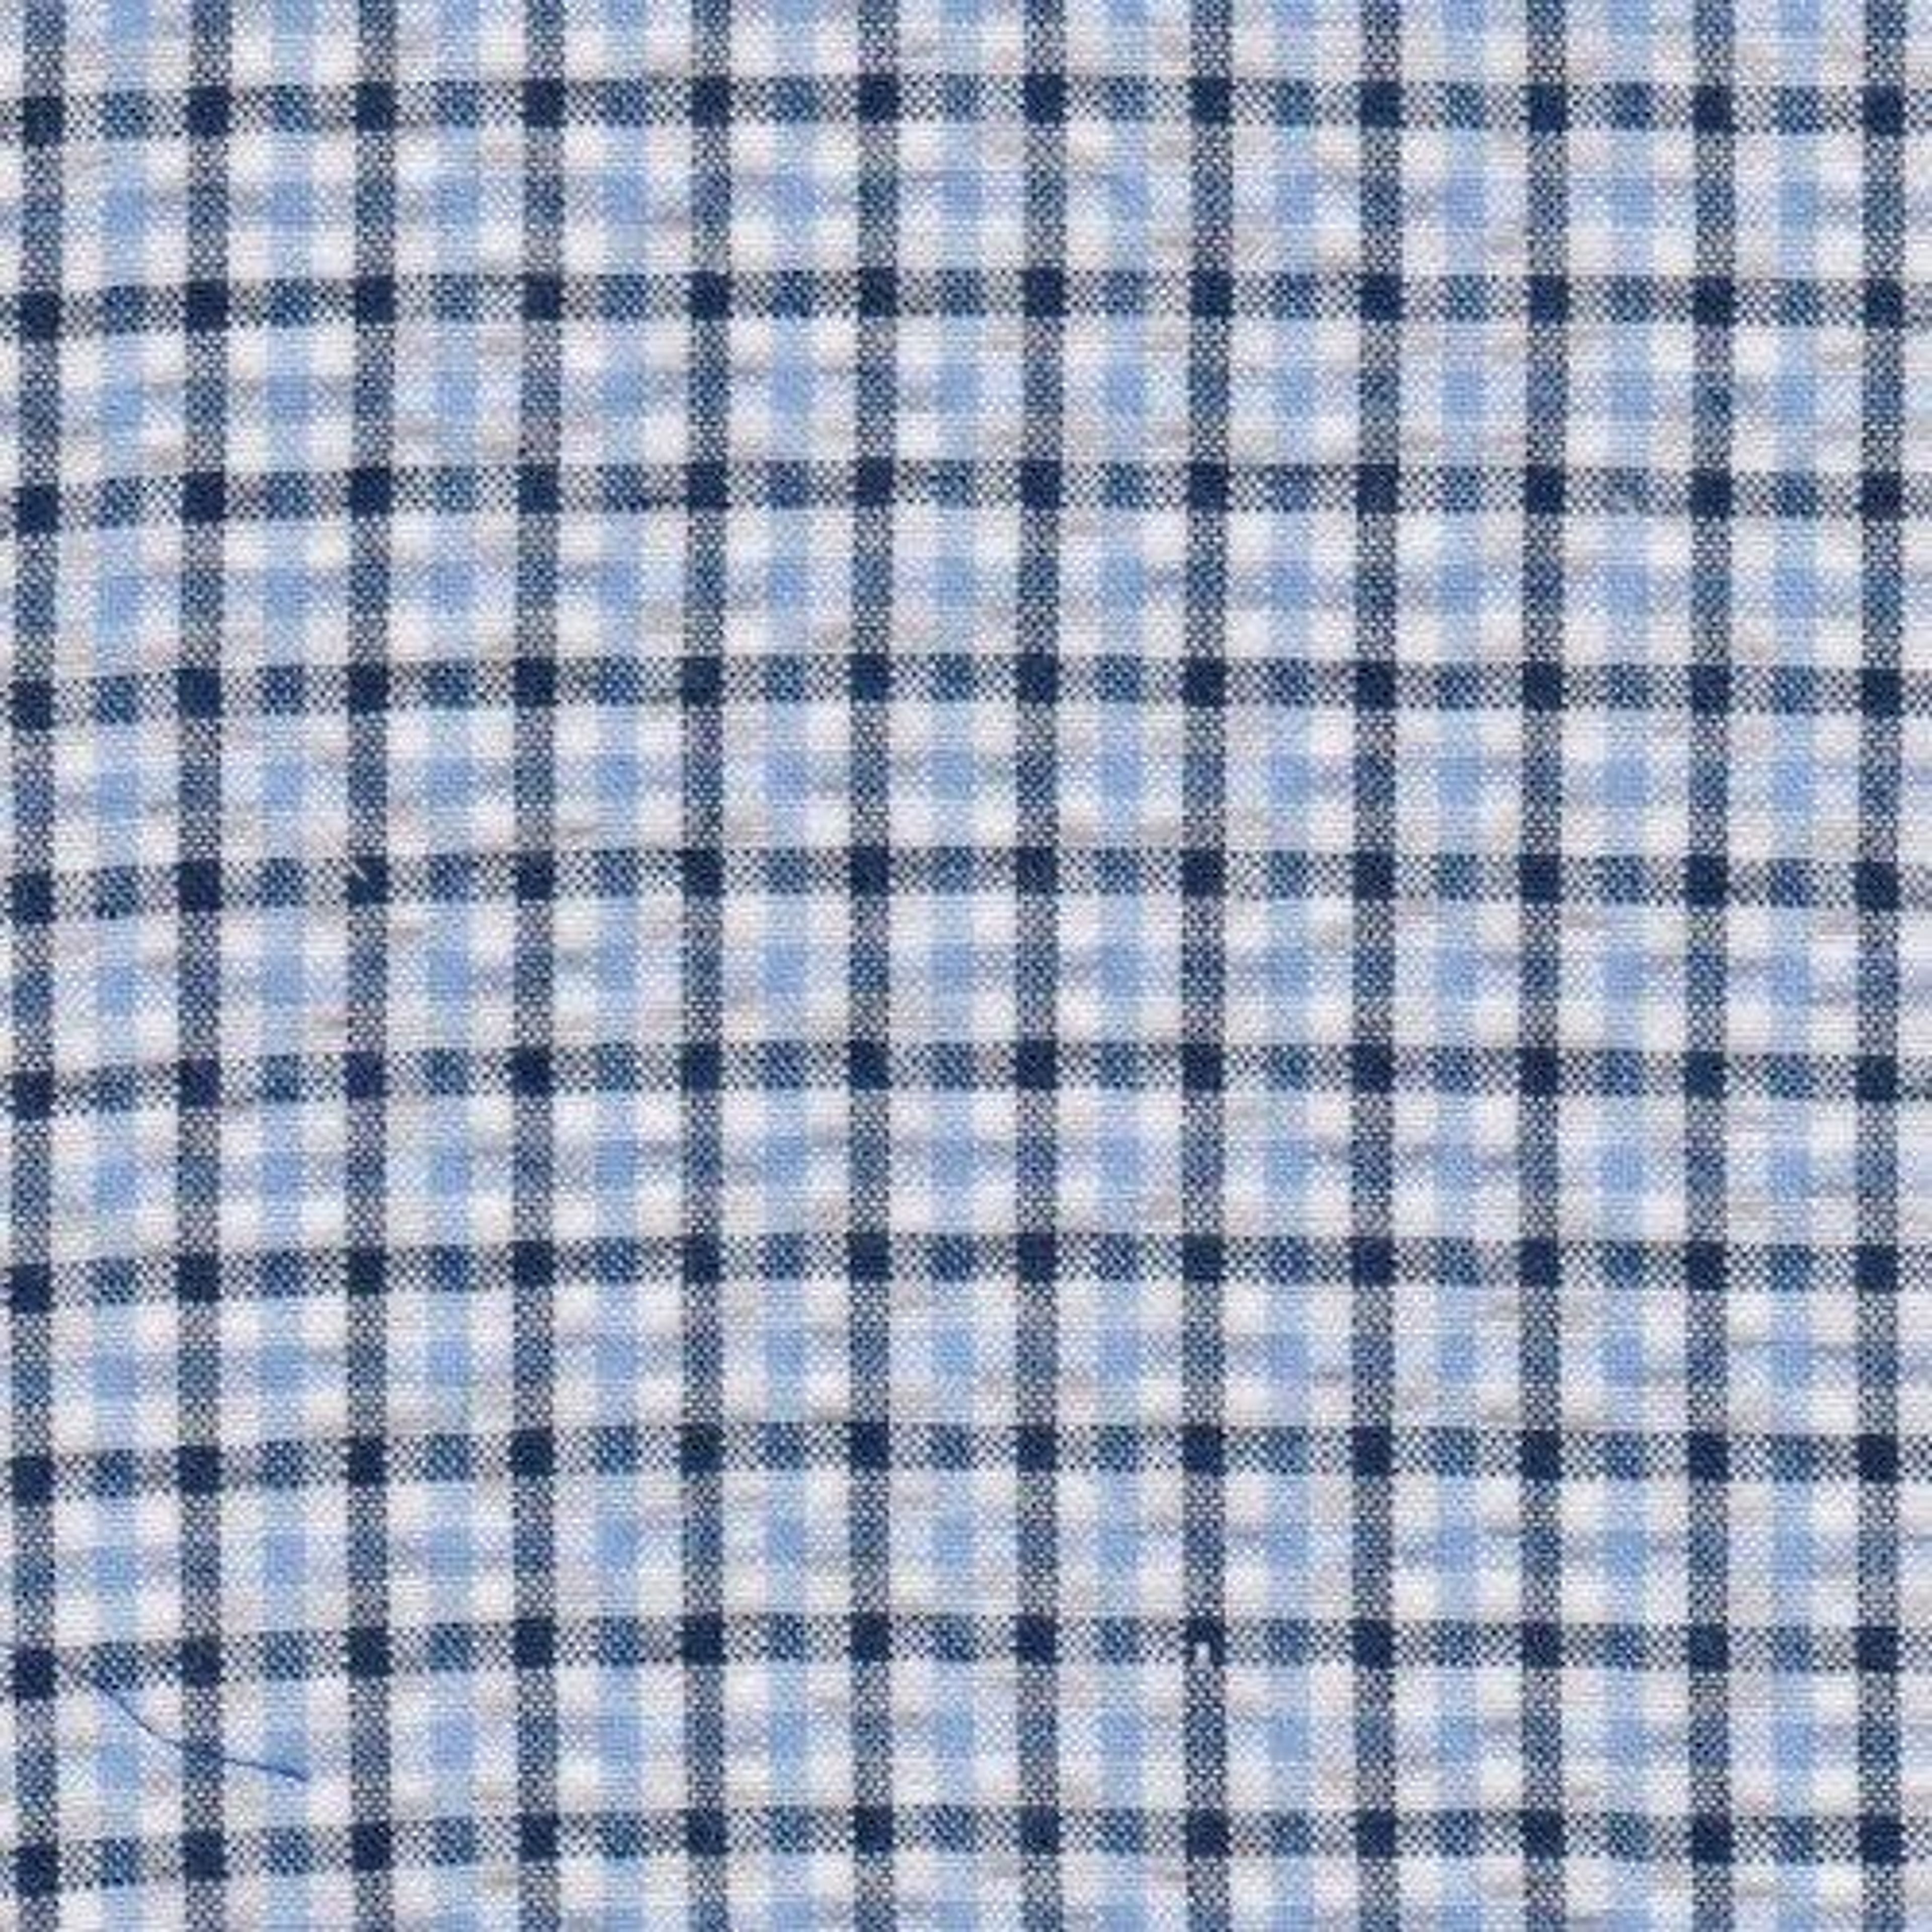 Blue Plaid UPF 25+ Seersucker Bucket Hat for Babies and Toddlers